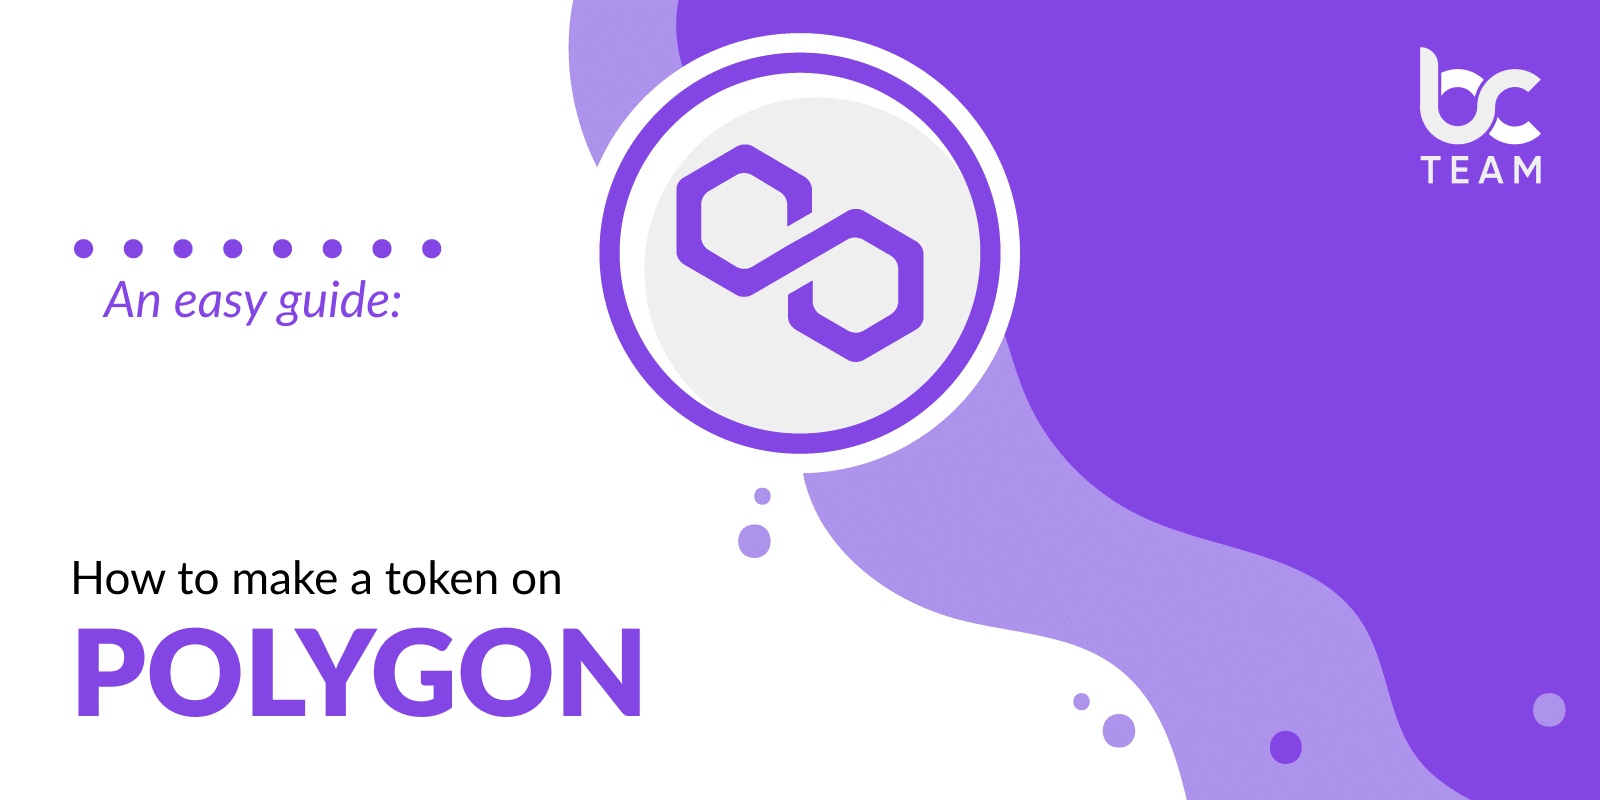 An easy guide on how to make a token on Polygon